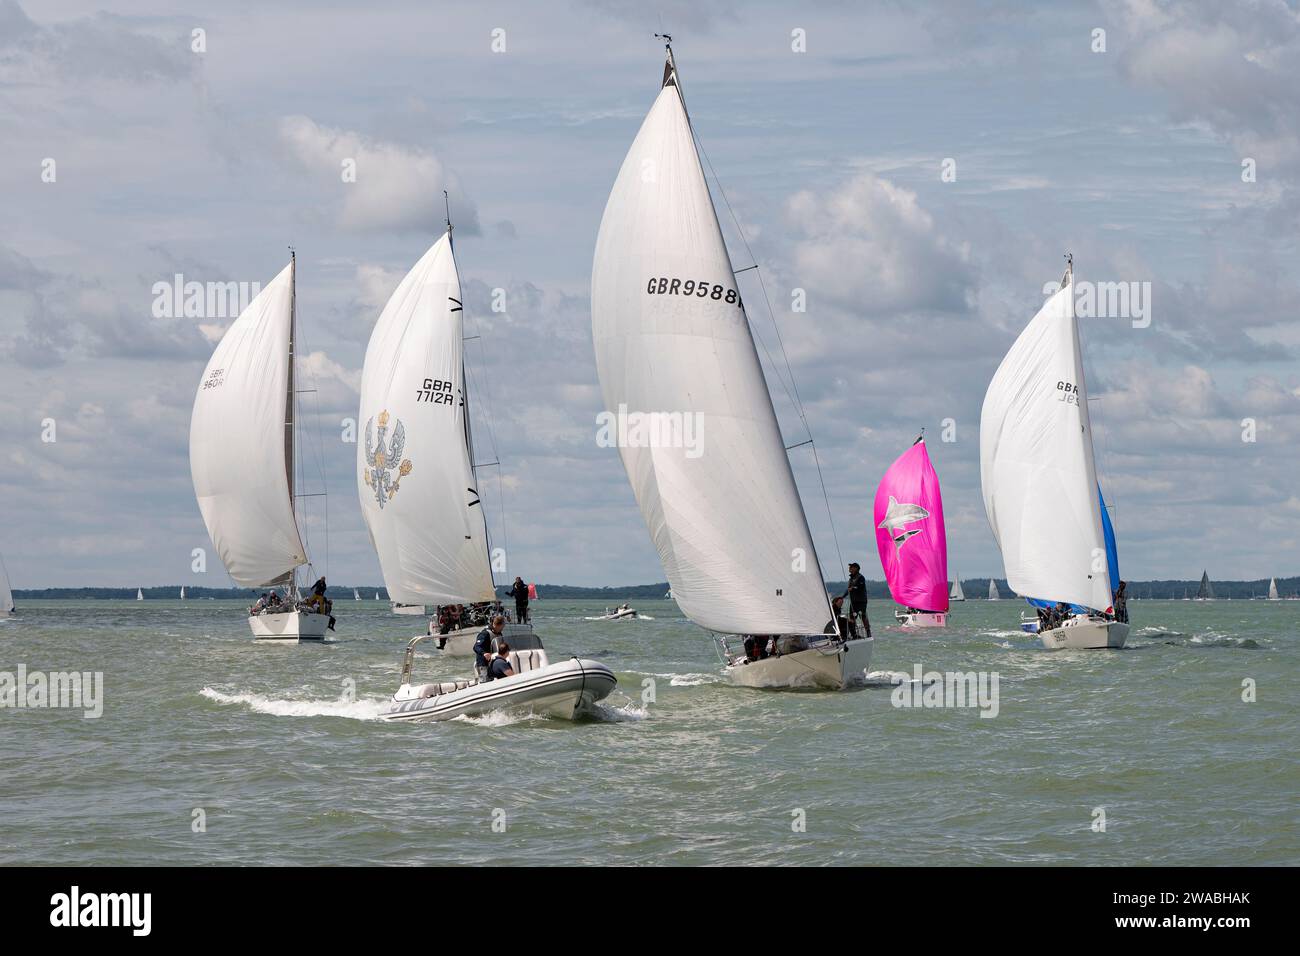 Close sailboat racing during the Cowes Week sailing regatta held in the Solent off the north coast of the Isle of Wight in Southern England Stock Photo